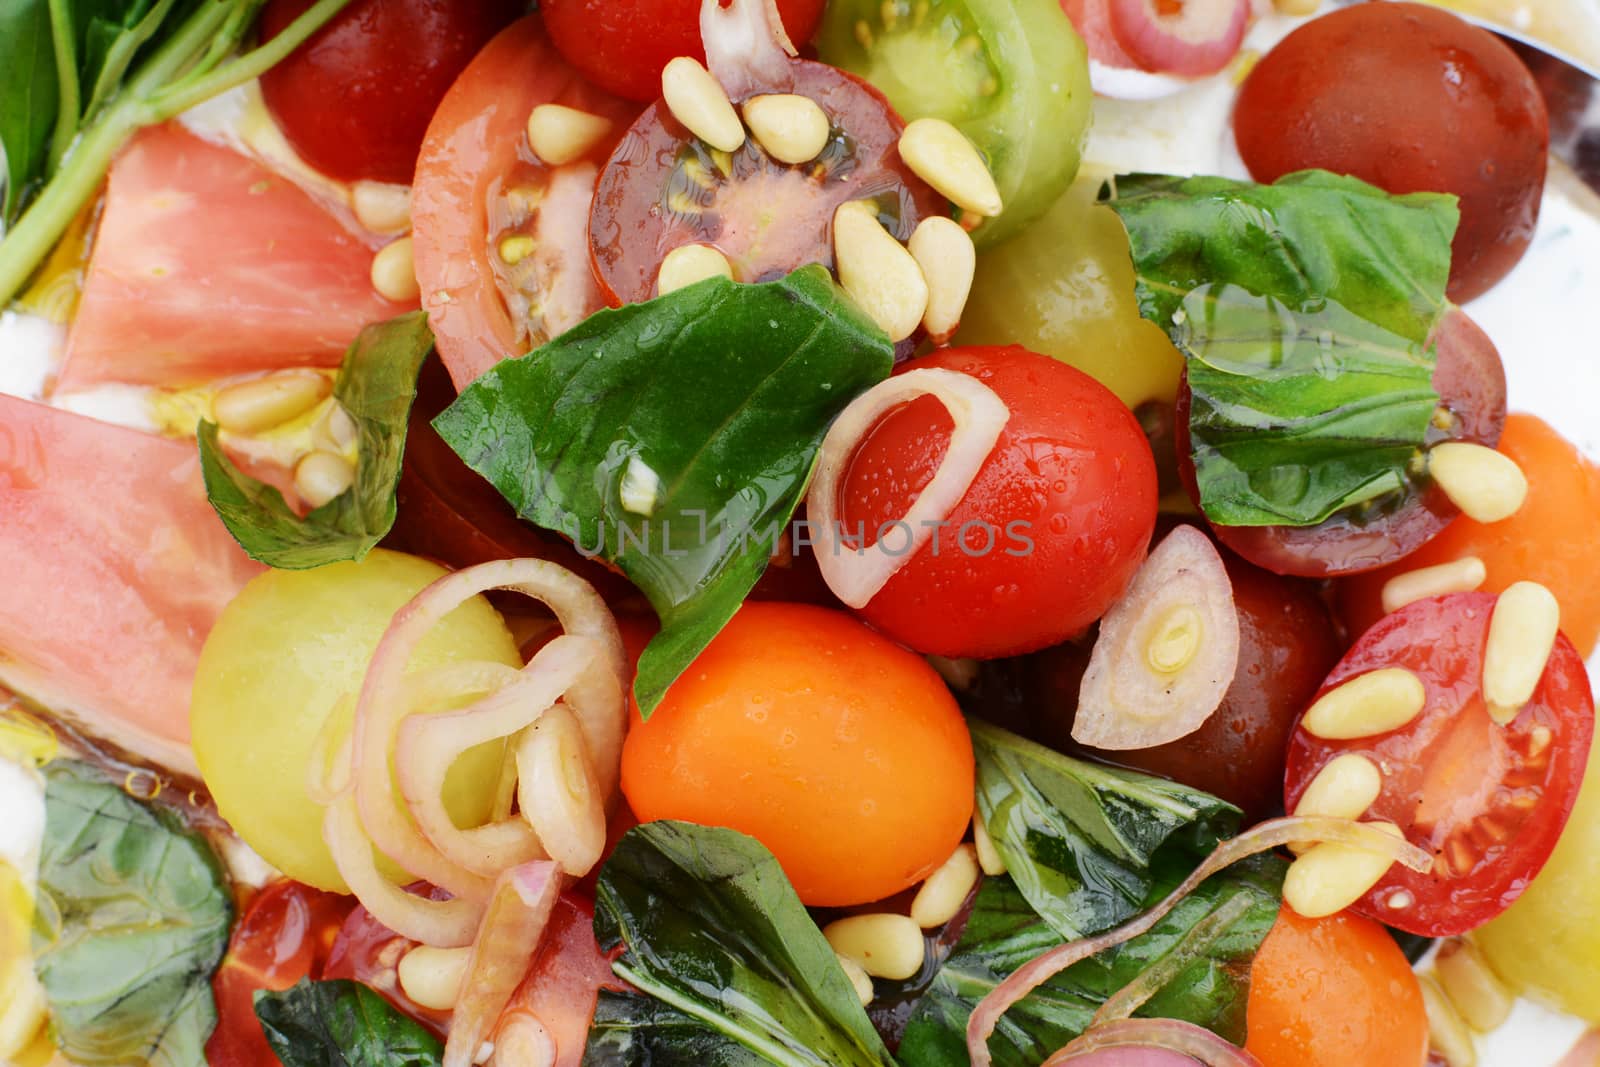 Detail of colourful fresh tomato salad with sliced shallots, pine nuts and basil leaves